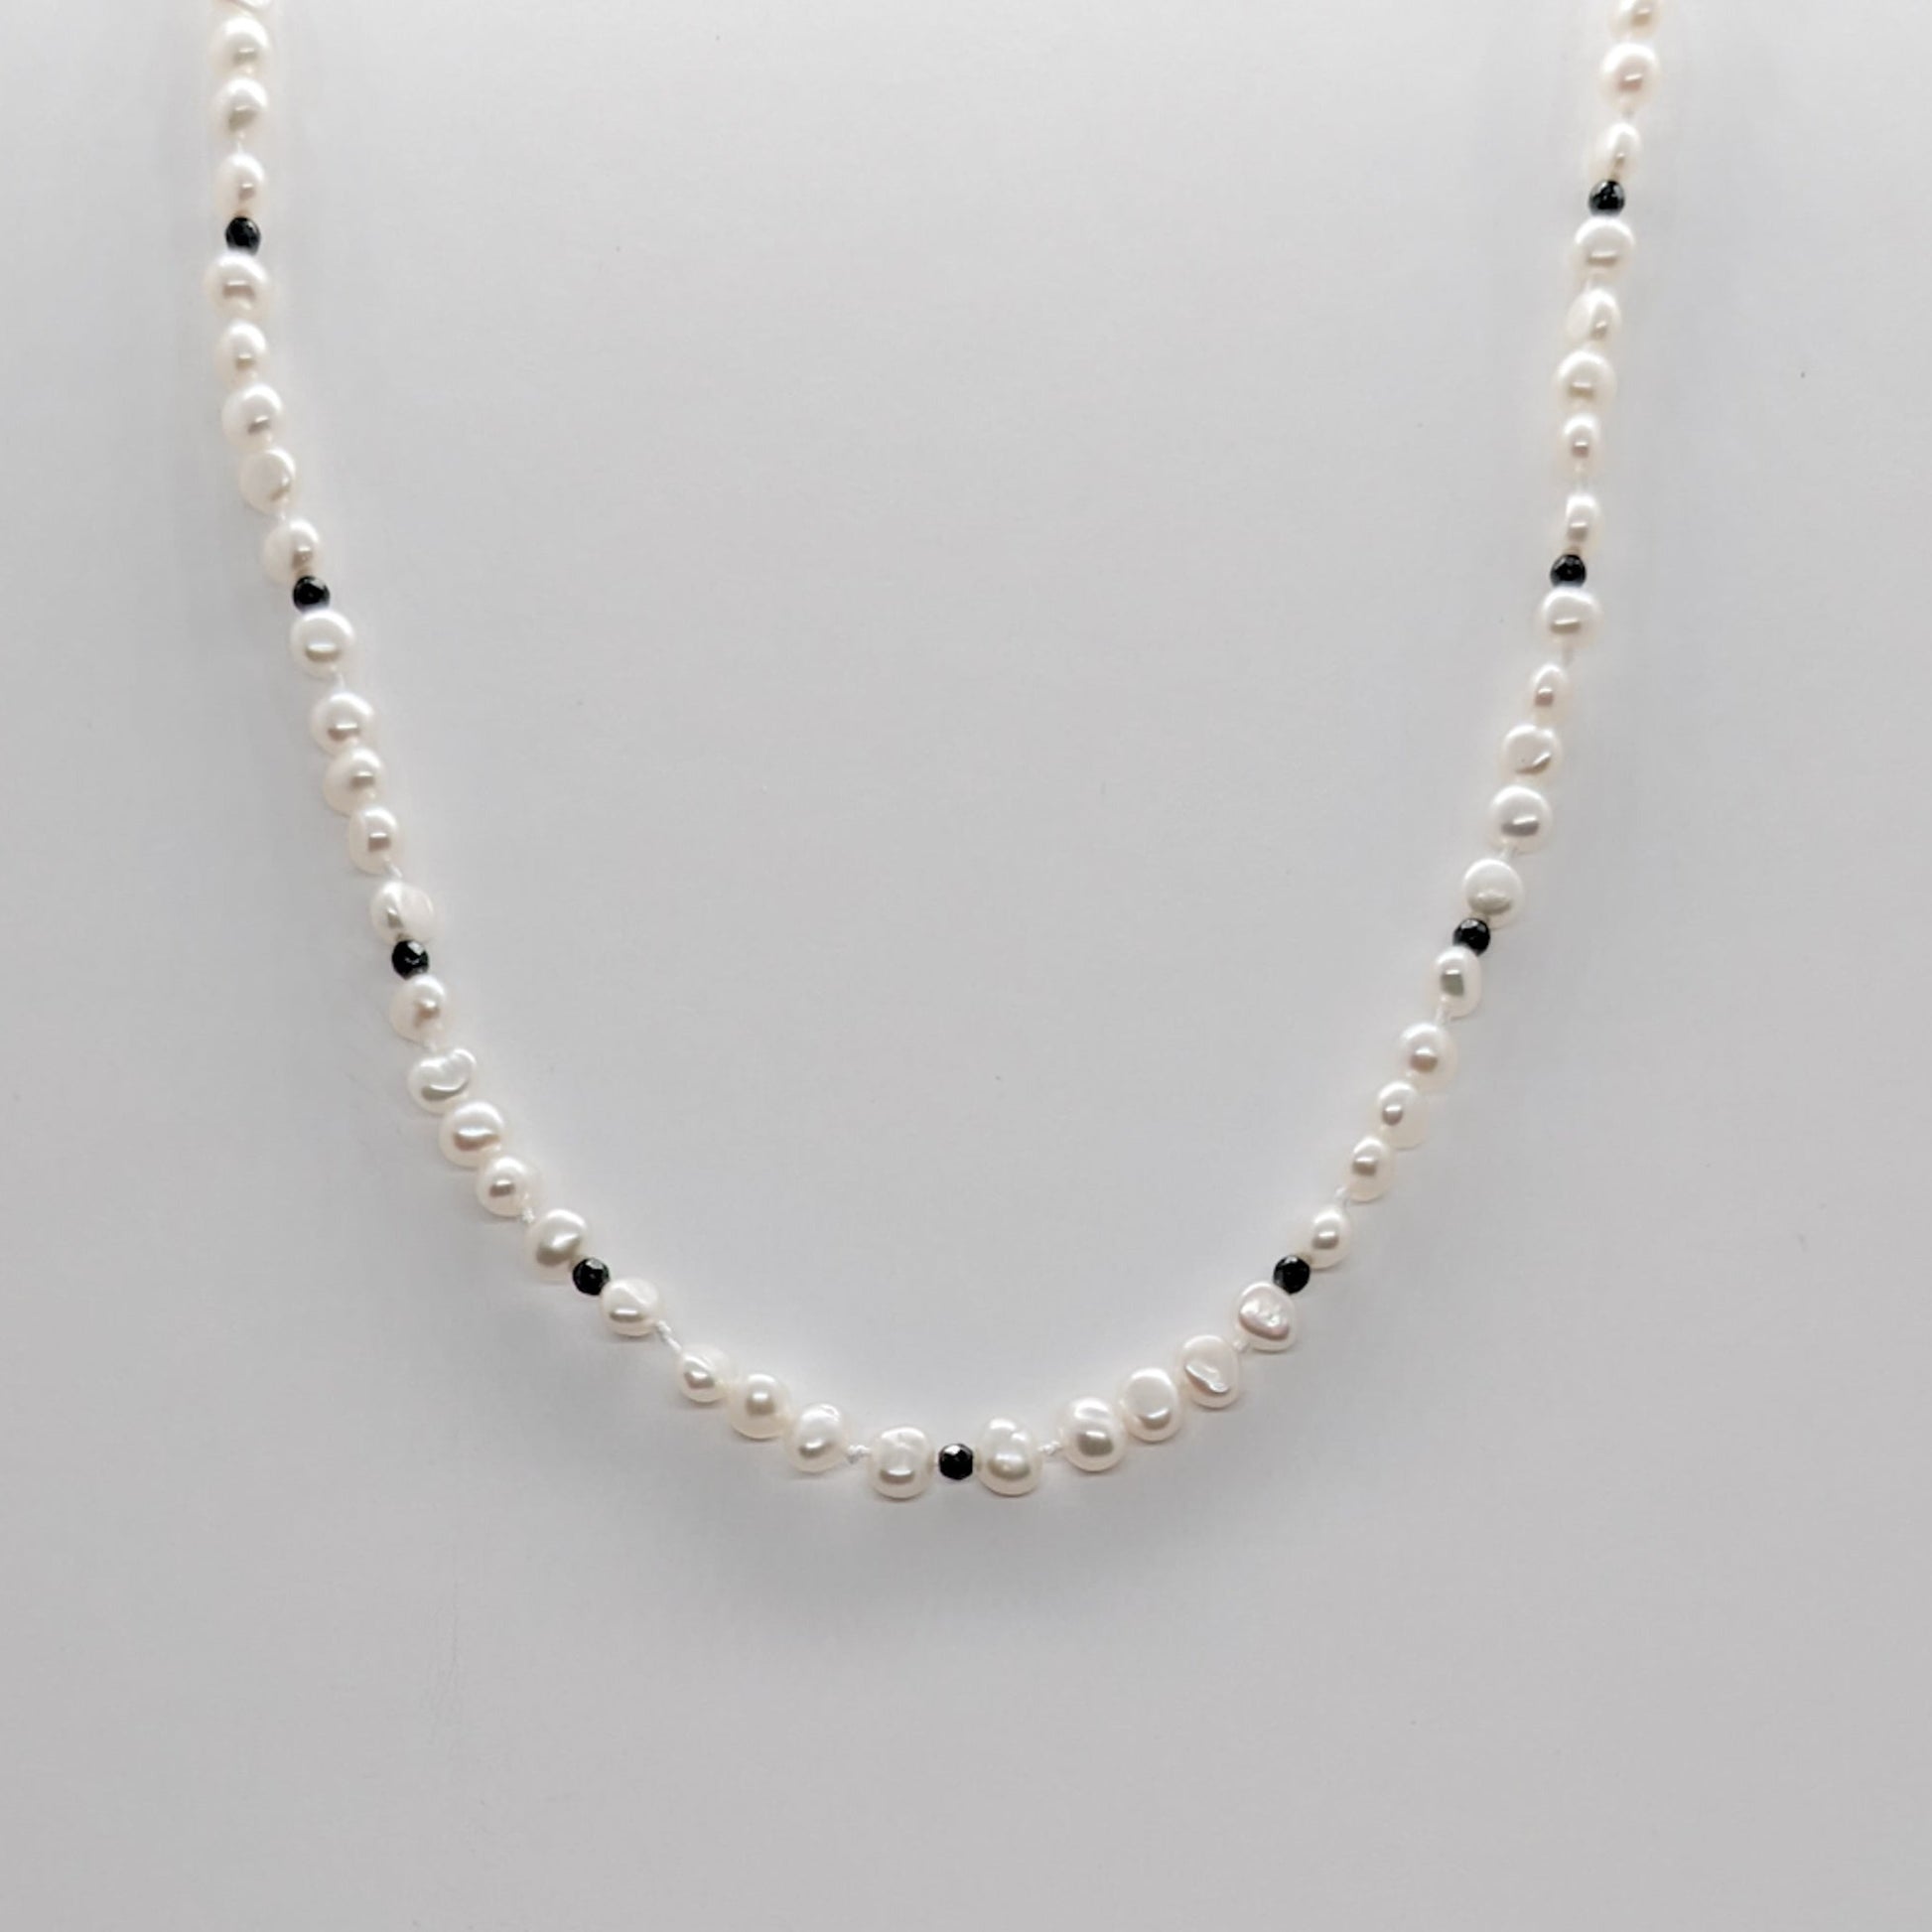 Necklace of keshi pearls and hematite pearls – atelier-emige